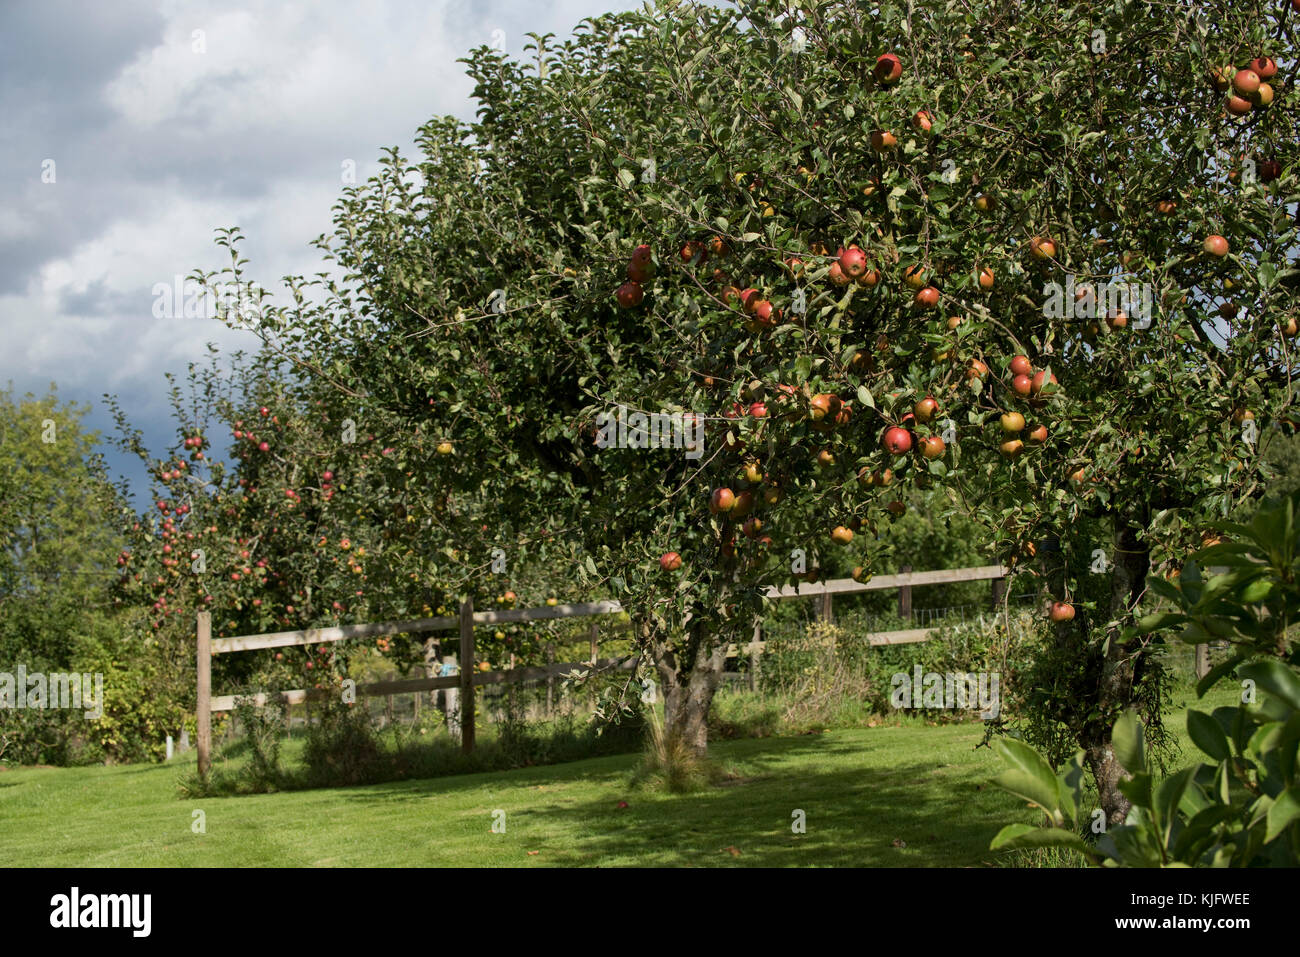 Mature trees in a domestic garden apple orchard with ripe red fruit of cos orange pippin anf other trees in fulkl fruit, Berkshire, September Stock Photo